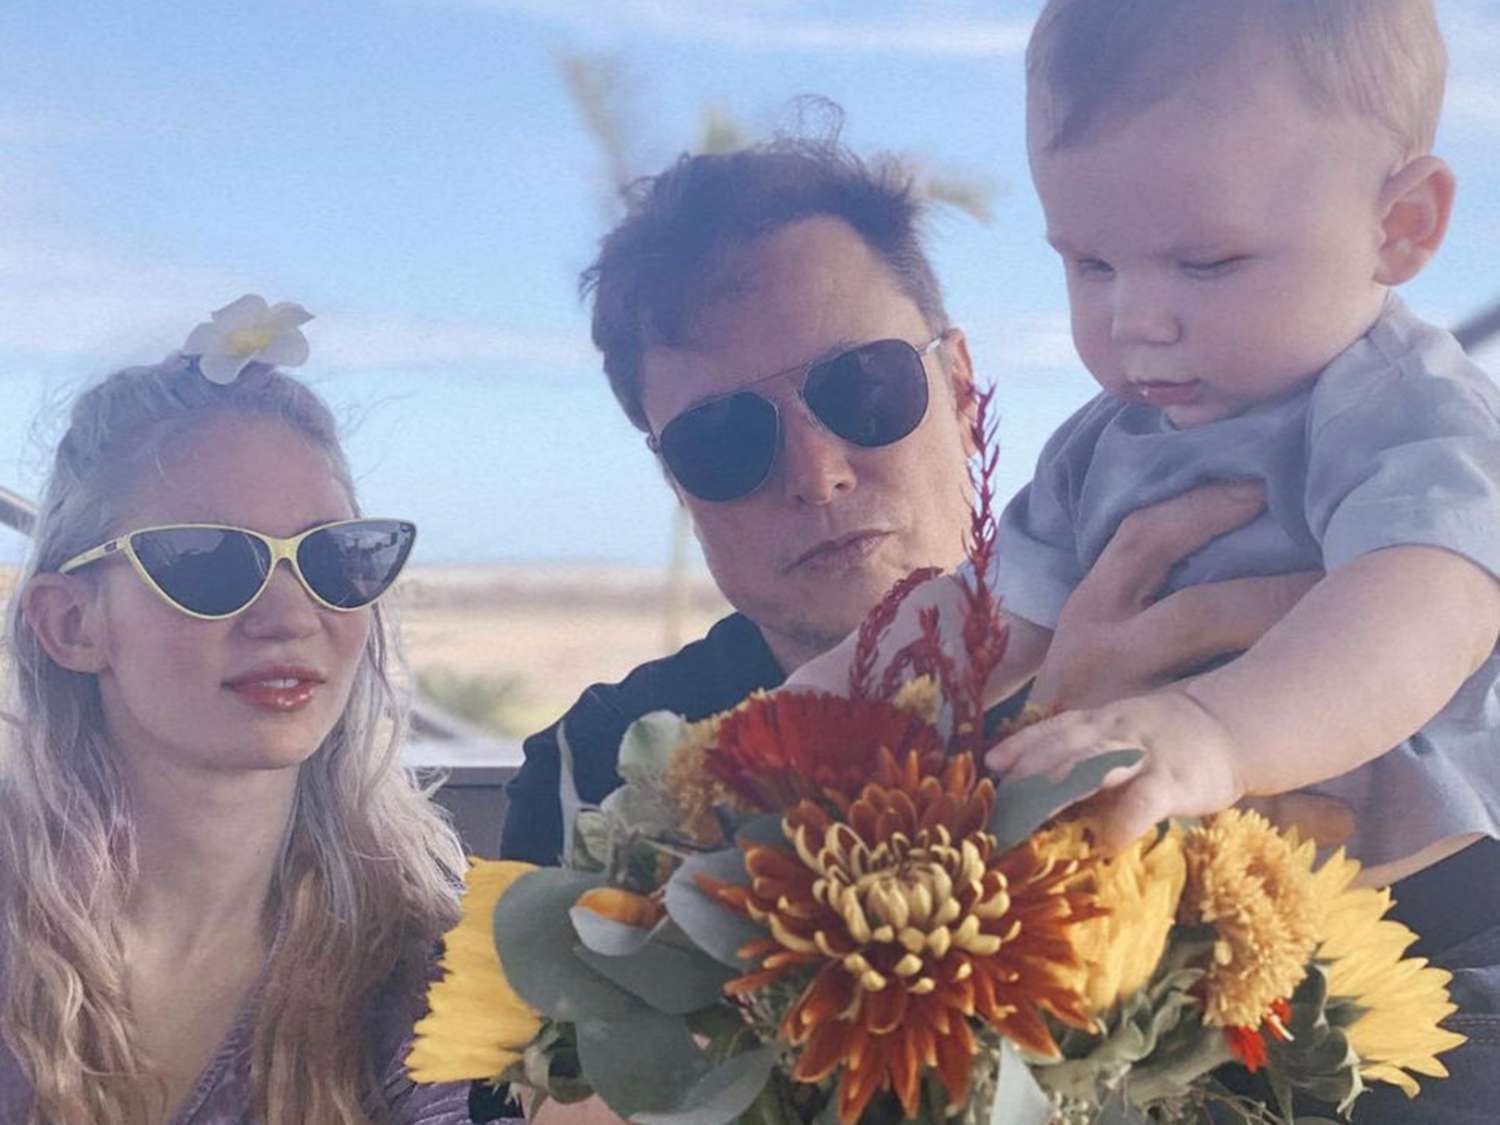 Elon Musk Third Baby with Musician Grimes